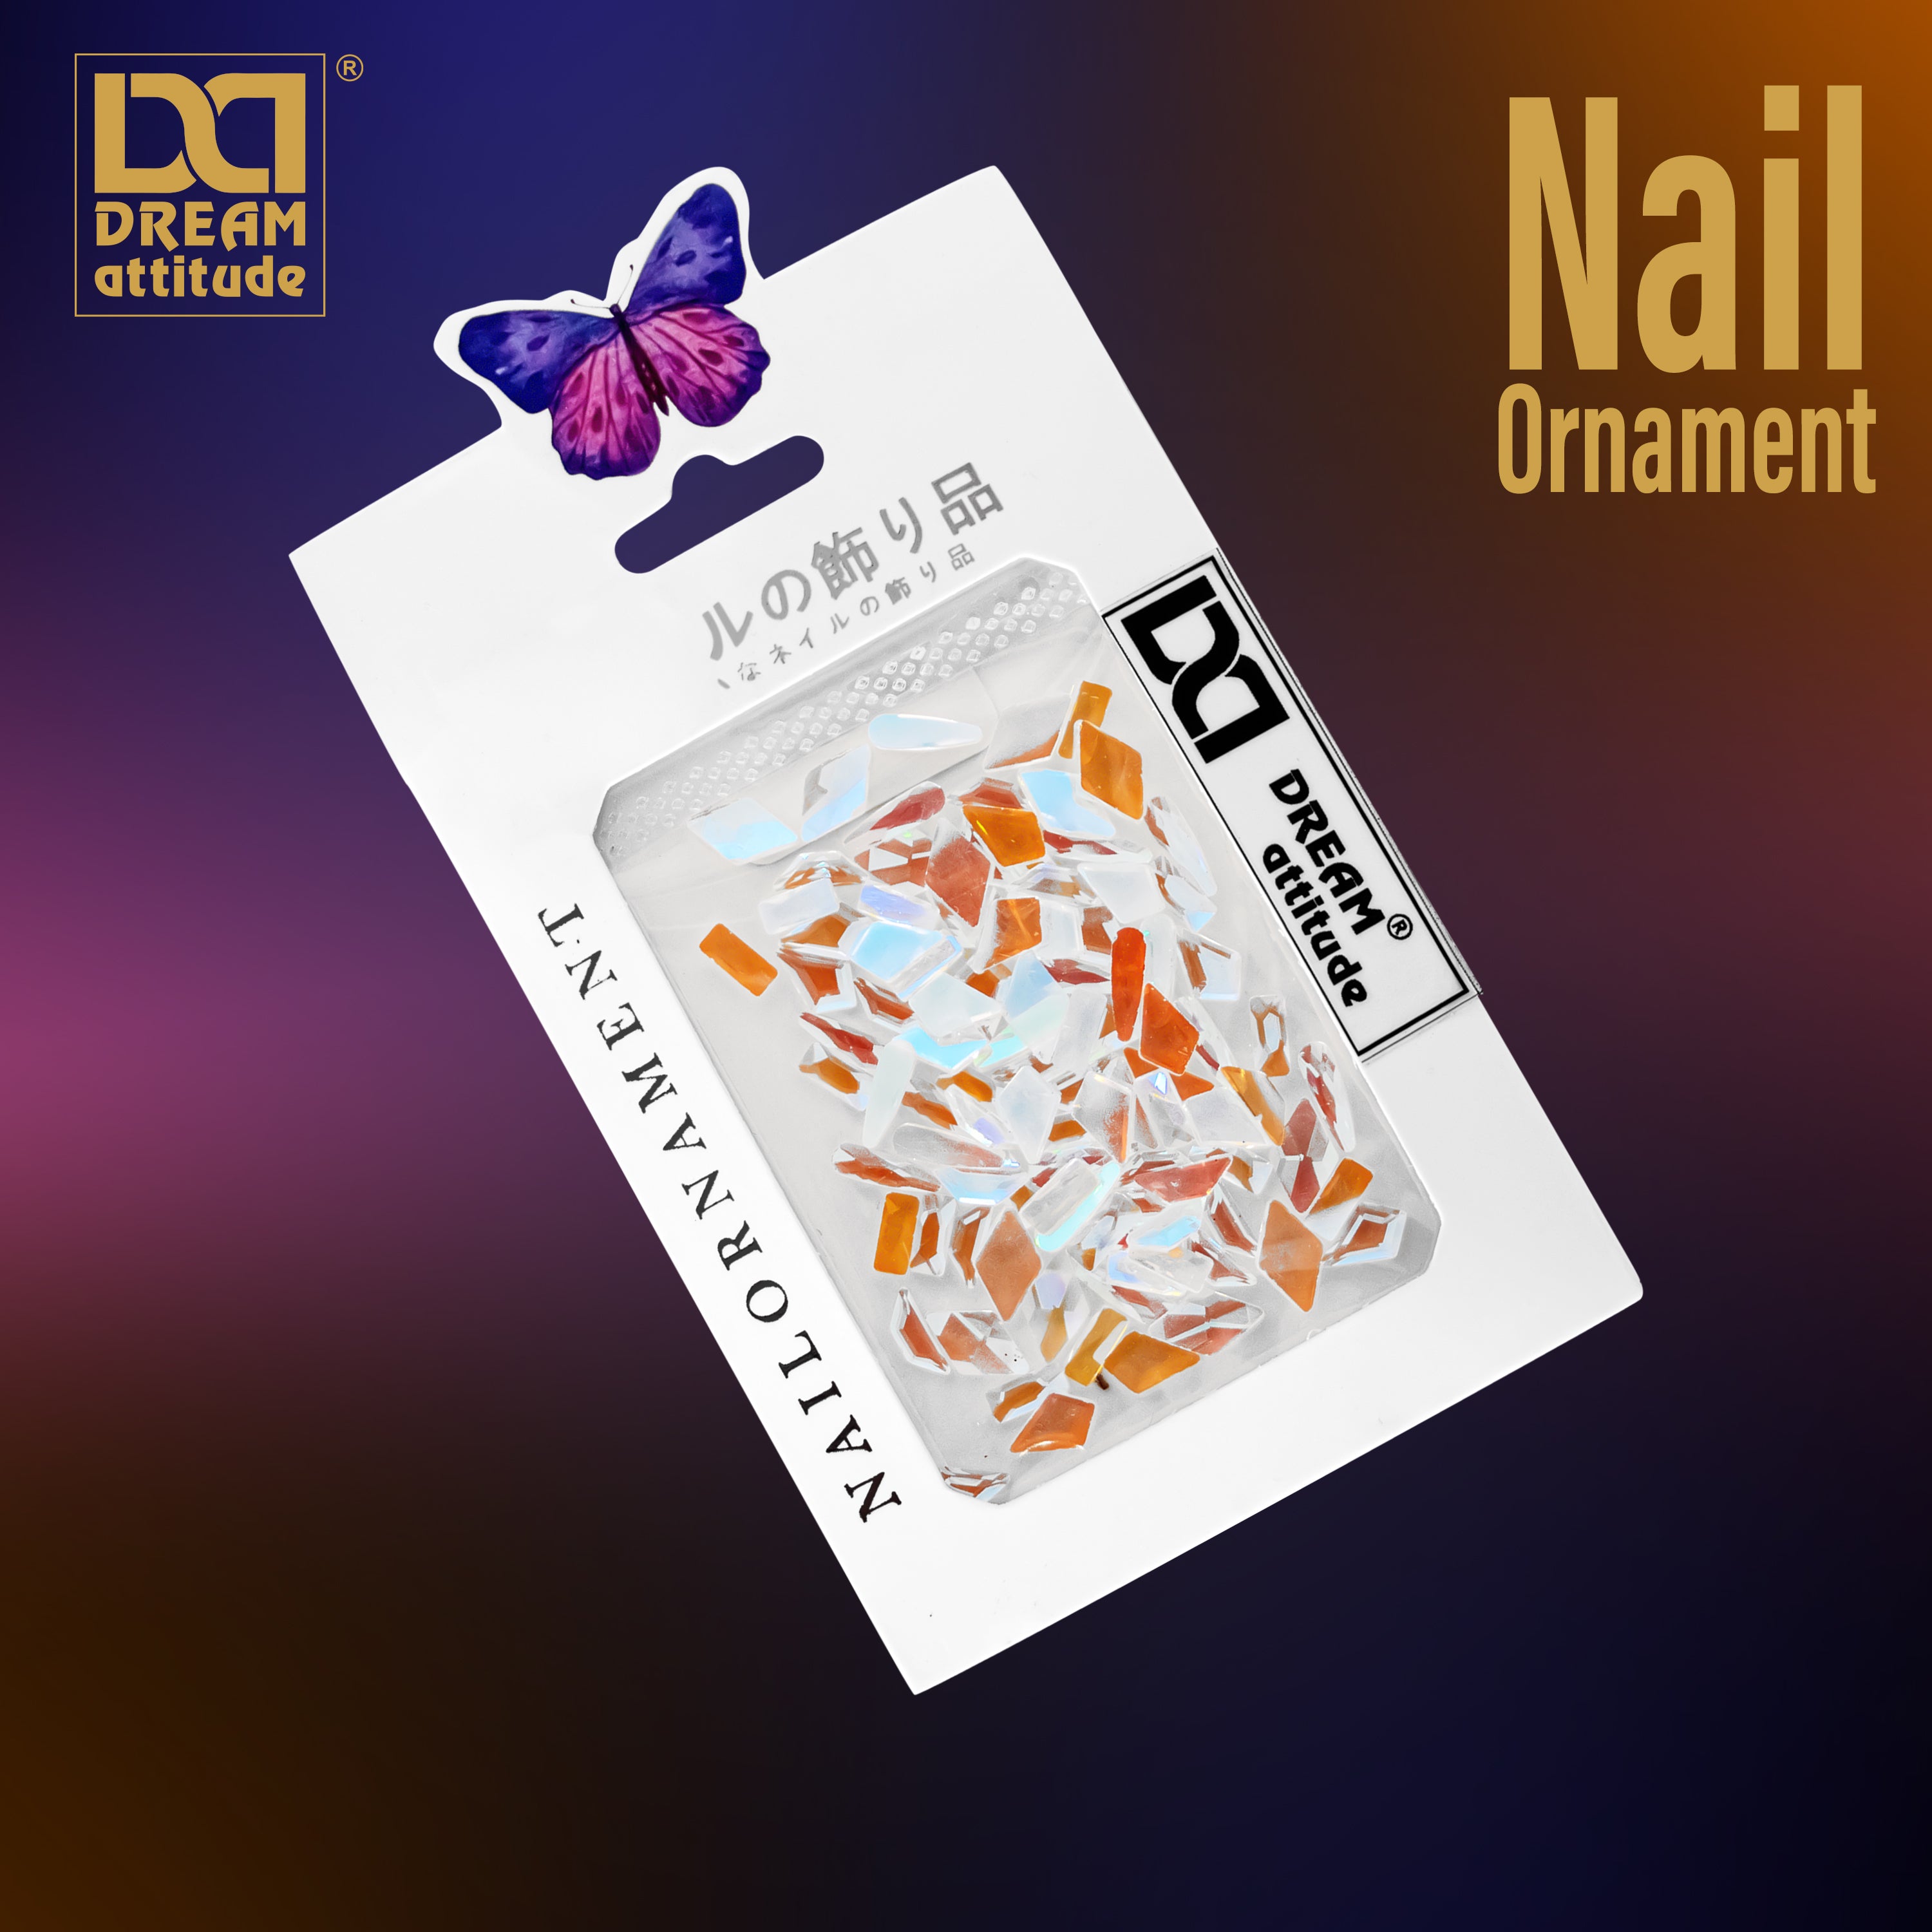 Dream Attitude Nail Ornaments: Elevate Your Nail Style with Effortless Elegance 1pct